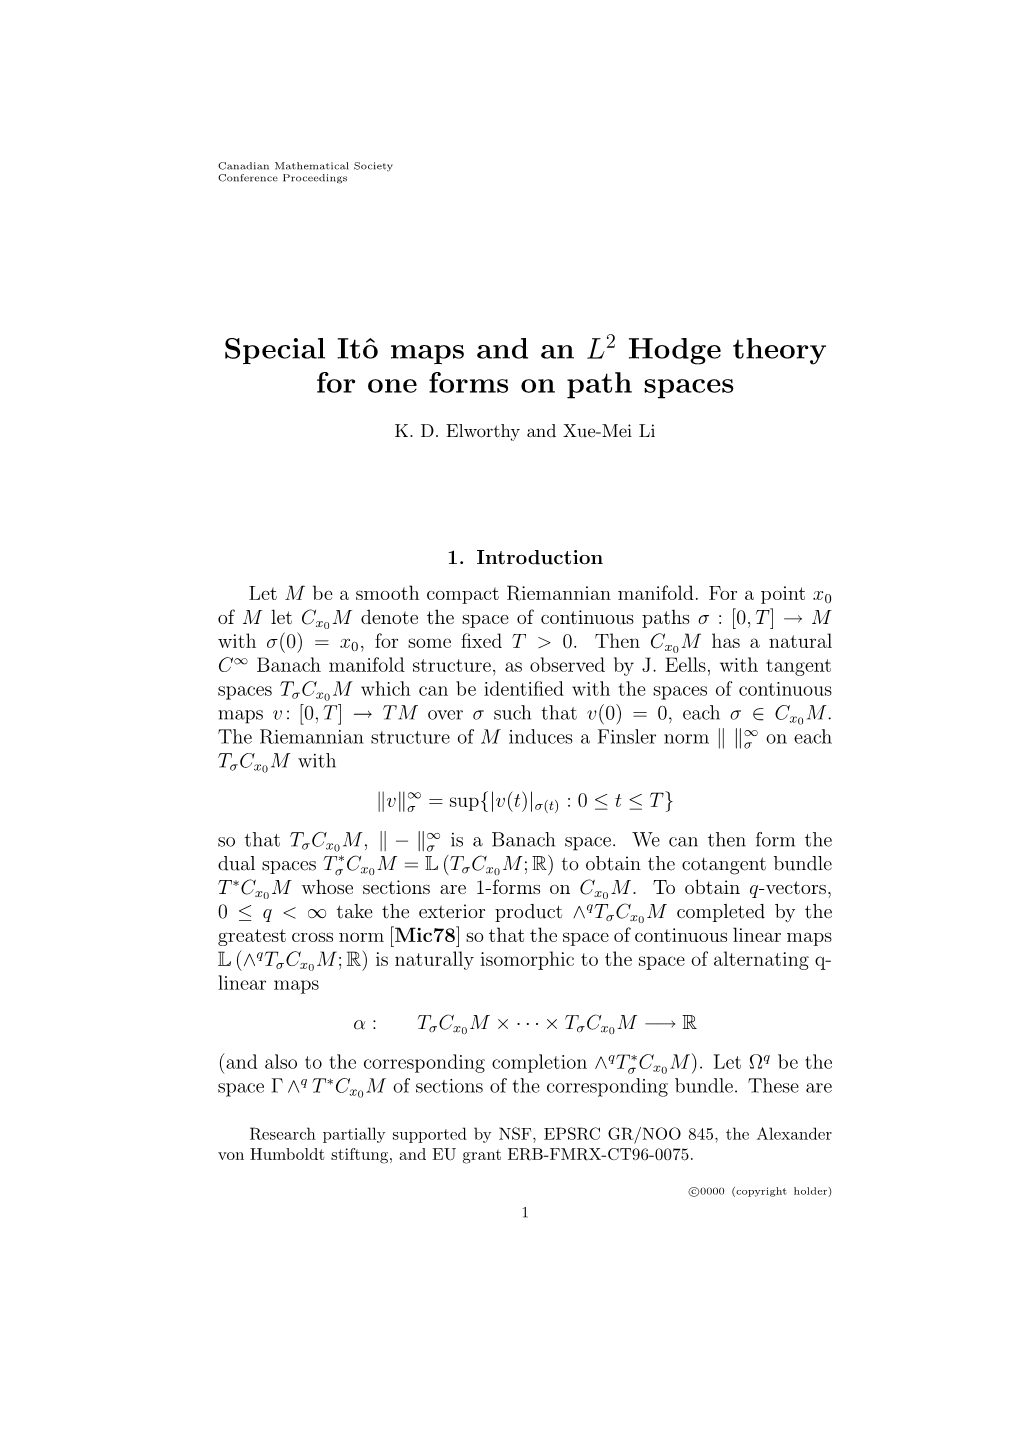 Special Itô Maps and an L2 Hodge Theory for One Forms on Path Spaces